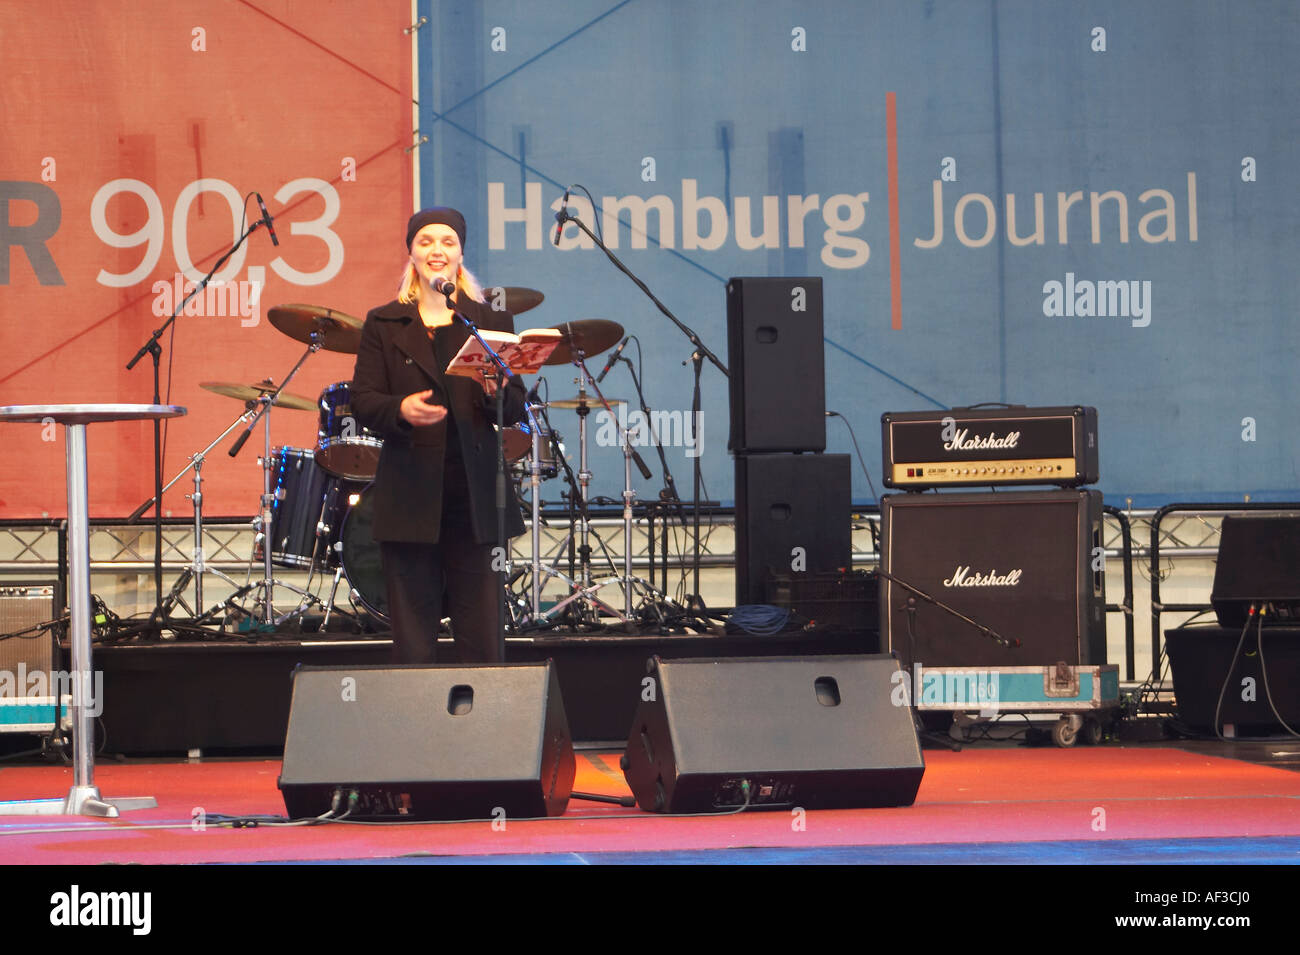 Football party in Hamburg. Singer on a stage Stock Photo